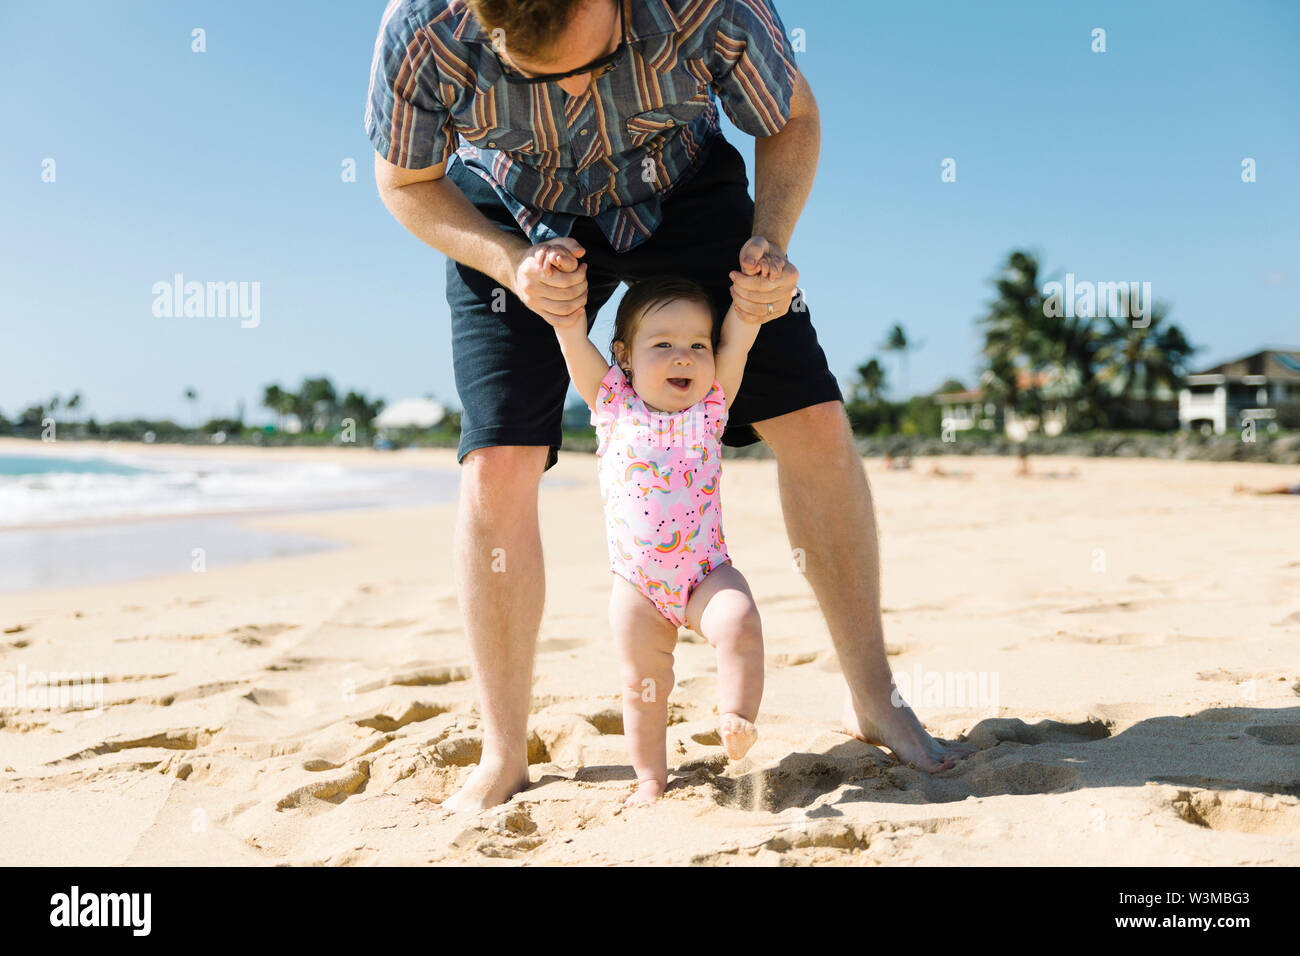 Father helping his baby girl walk on beach Stock Photo